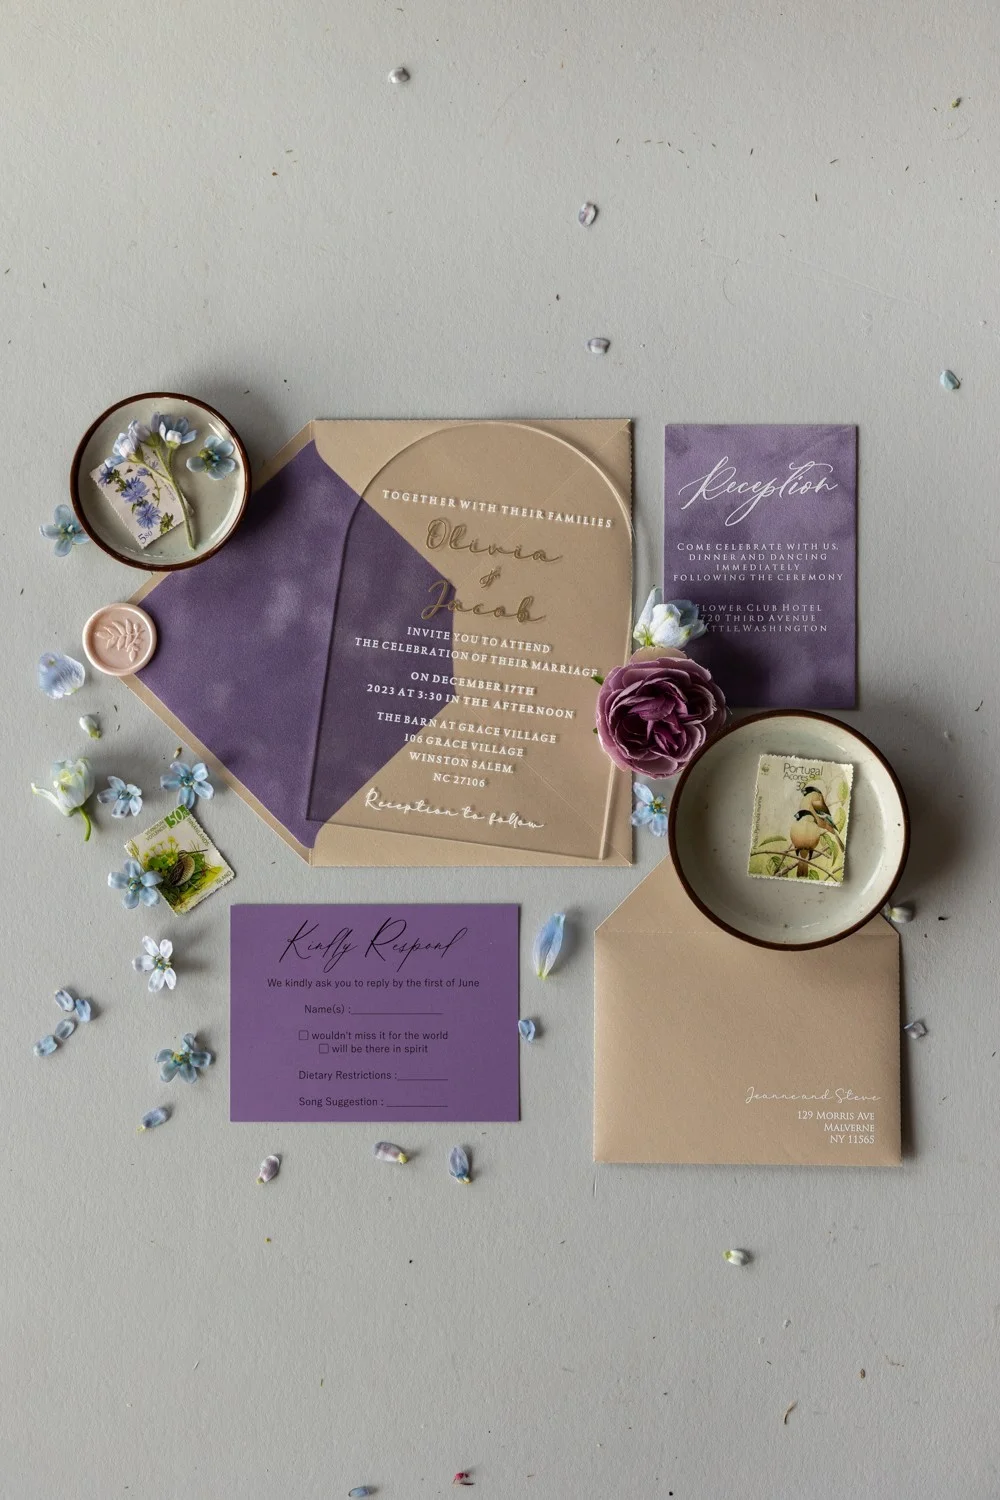 Arch Acrylic Gold Wedding Invitation: Elegant Velvet Suite with Lavender Accents - GL53